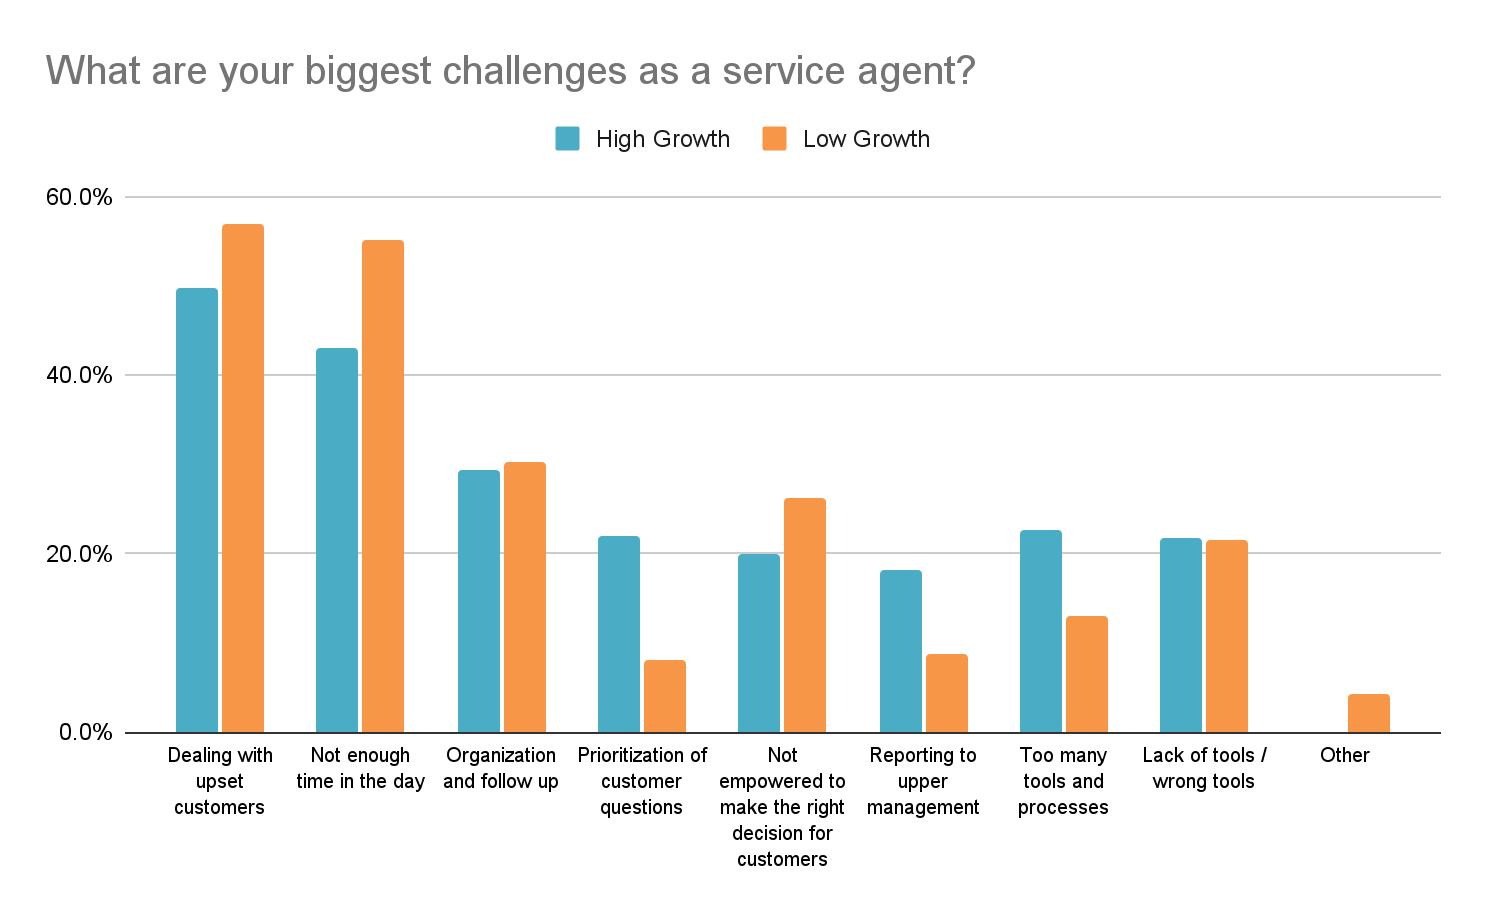 biggest challenges as a service agent graphic